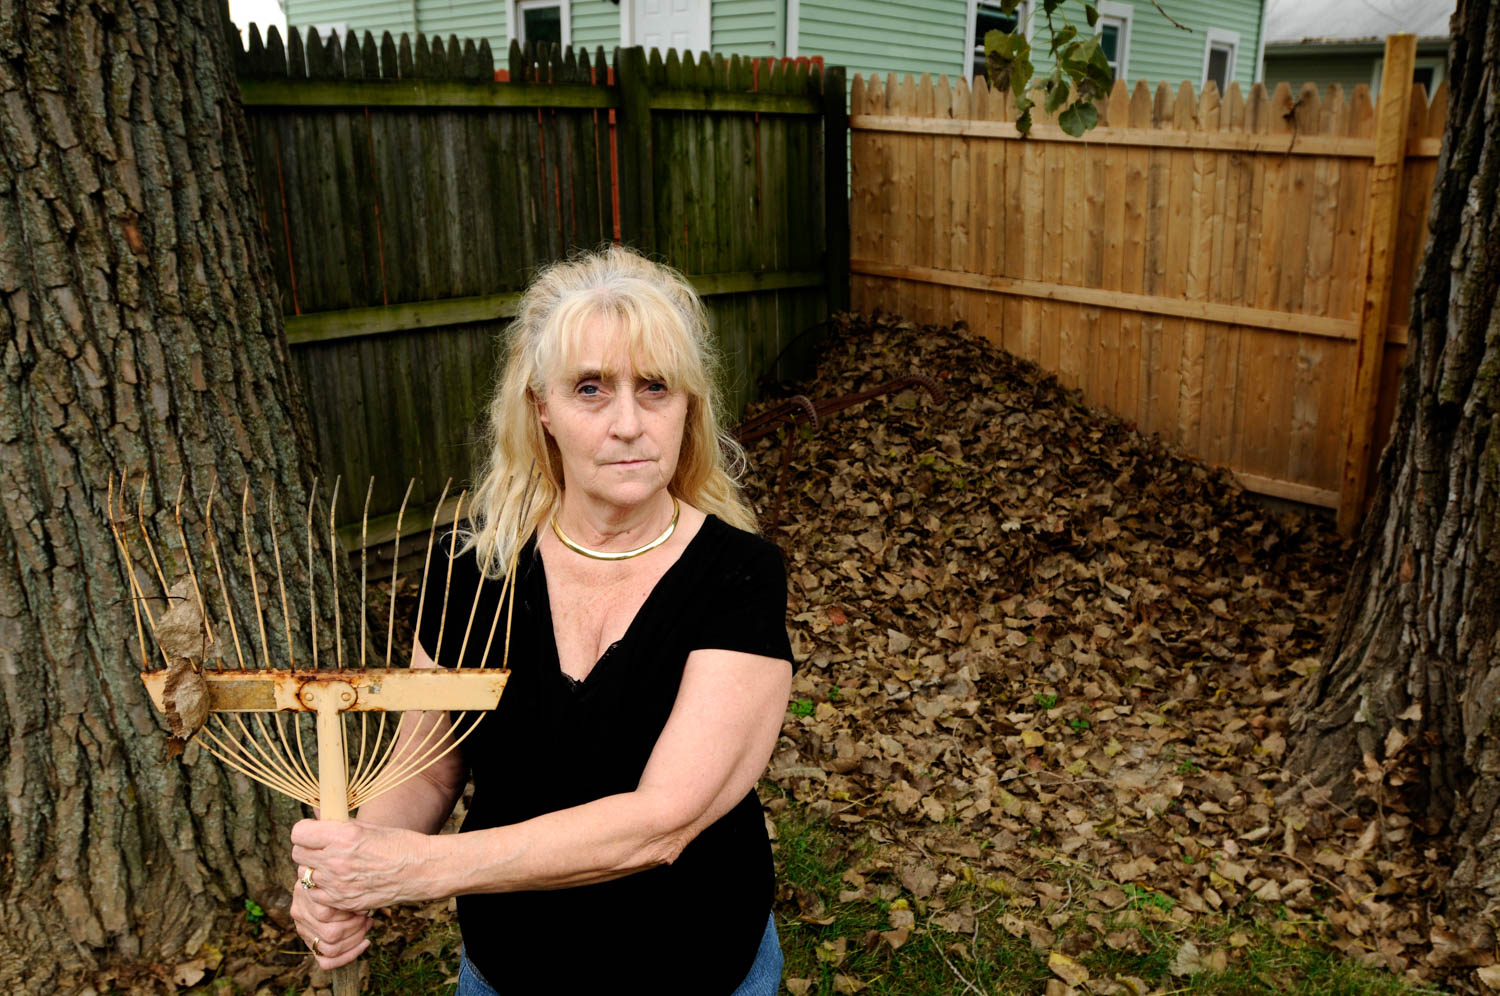 Nancy Schaeffer of Moline isn't about to clean up the mess that her neighbors made in her backyard on Friday September 18, 2009. Ms. Schaeffer watched in disbelief as her neighbors dumped numerous garbage cans full of leaves over her fence and into her yard. Ms. Schaeffer and her husband George Schaeffer, 1157 49th Street, have filed a police complaint. They have also asked the City of Moline for help dealing with the situation because they feel the neighbor's action was precipitated by Moline's new leaf burning ban. 